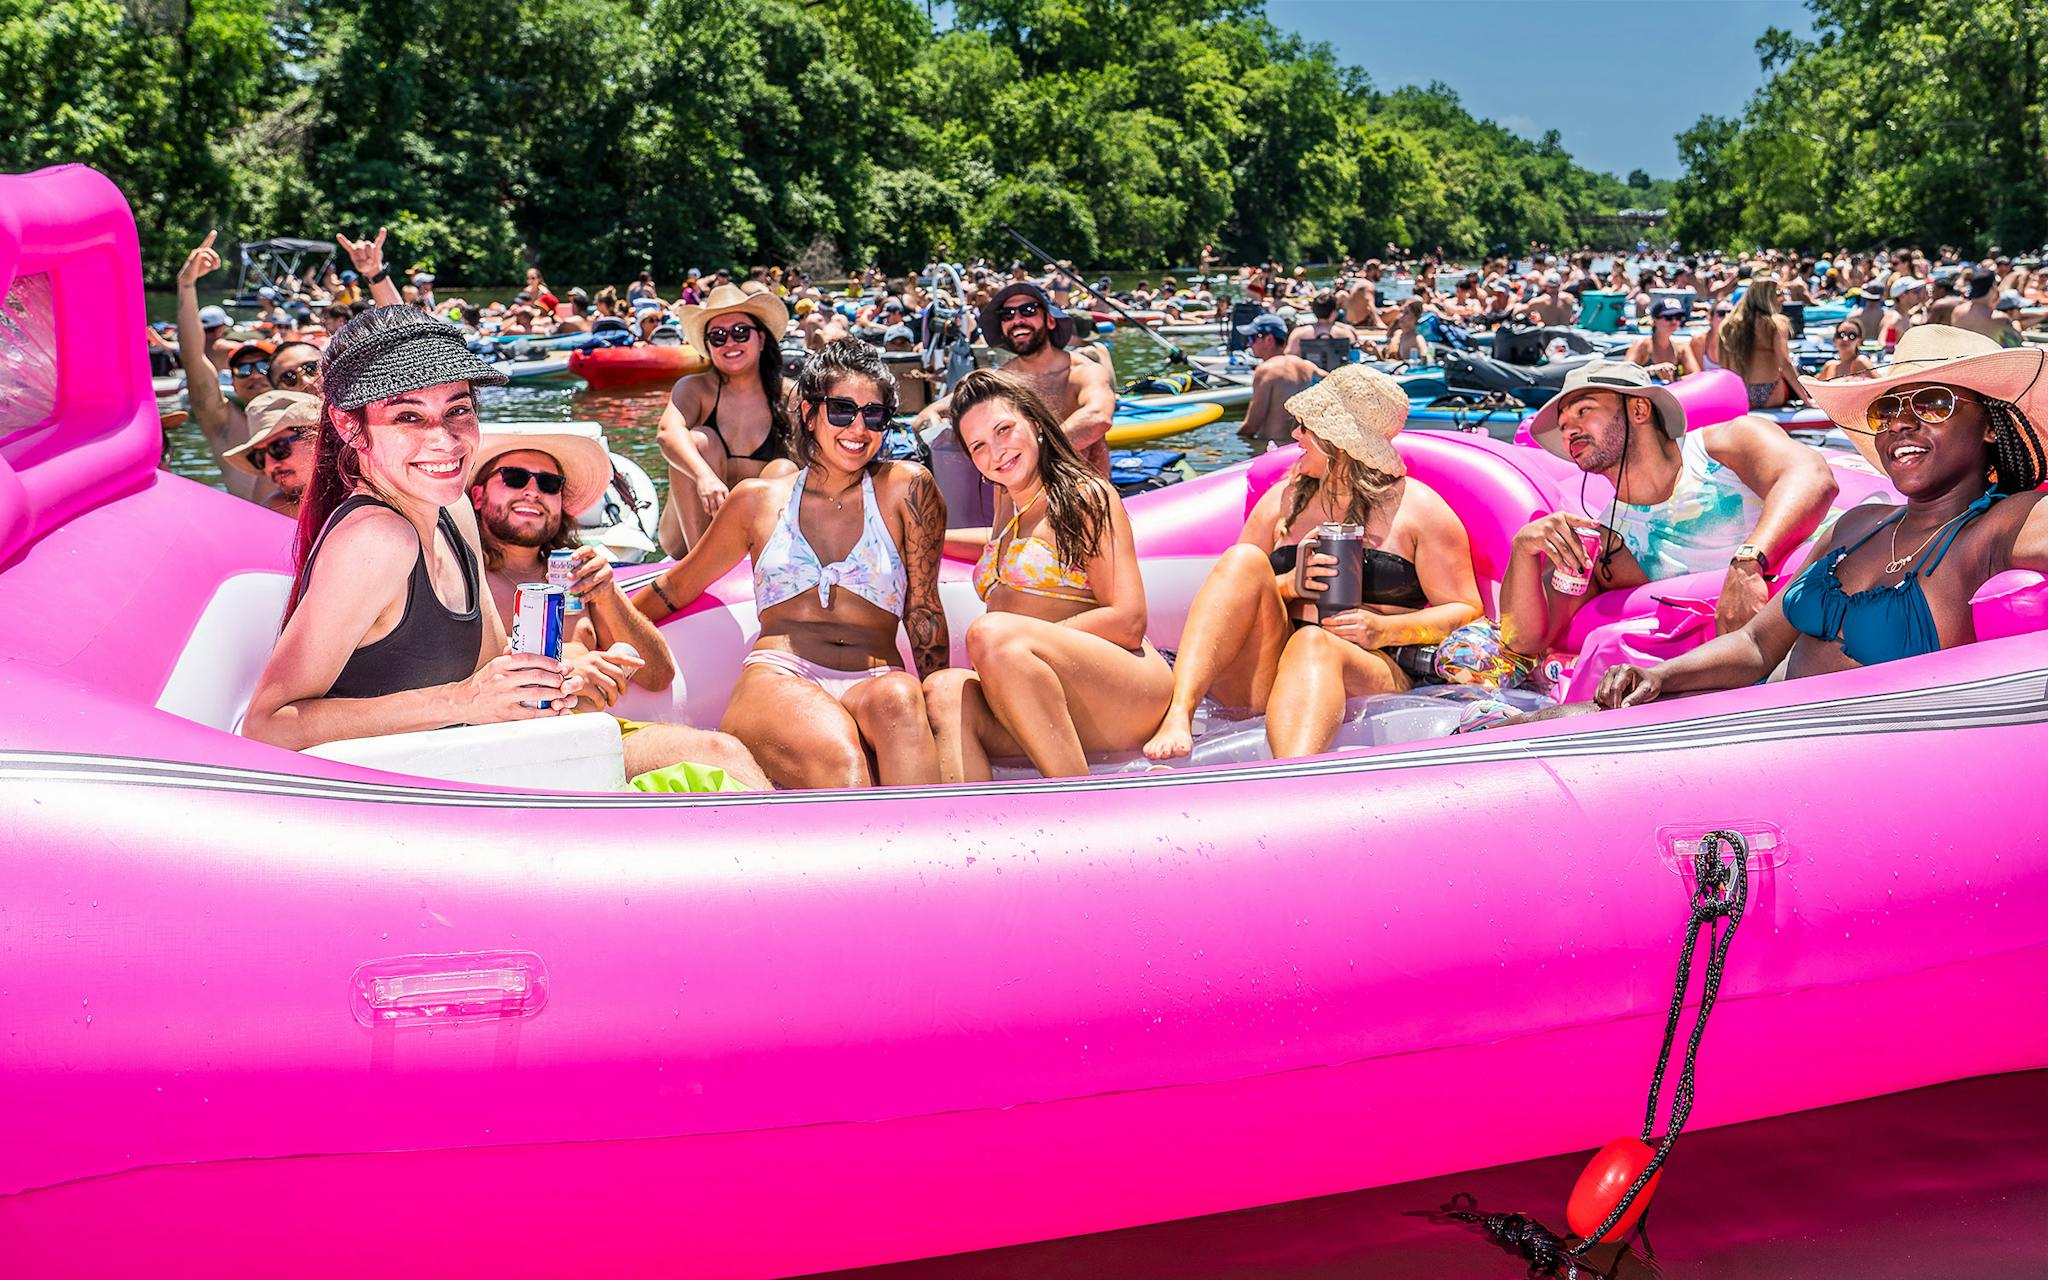 Lake goers in a large pink float.